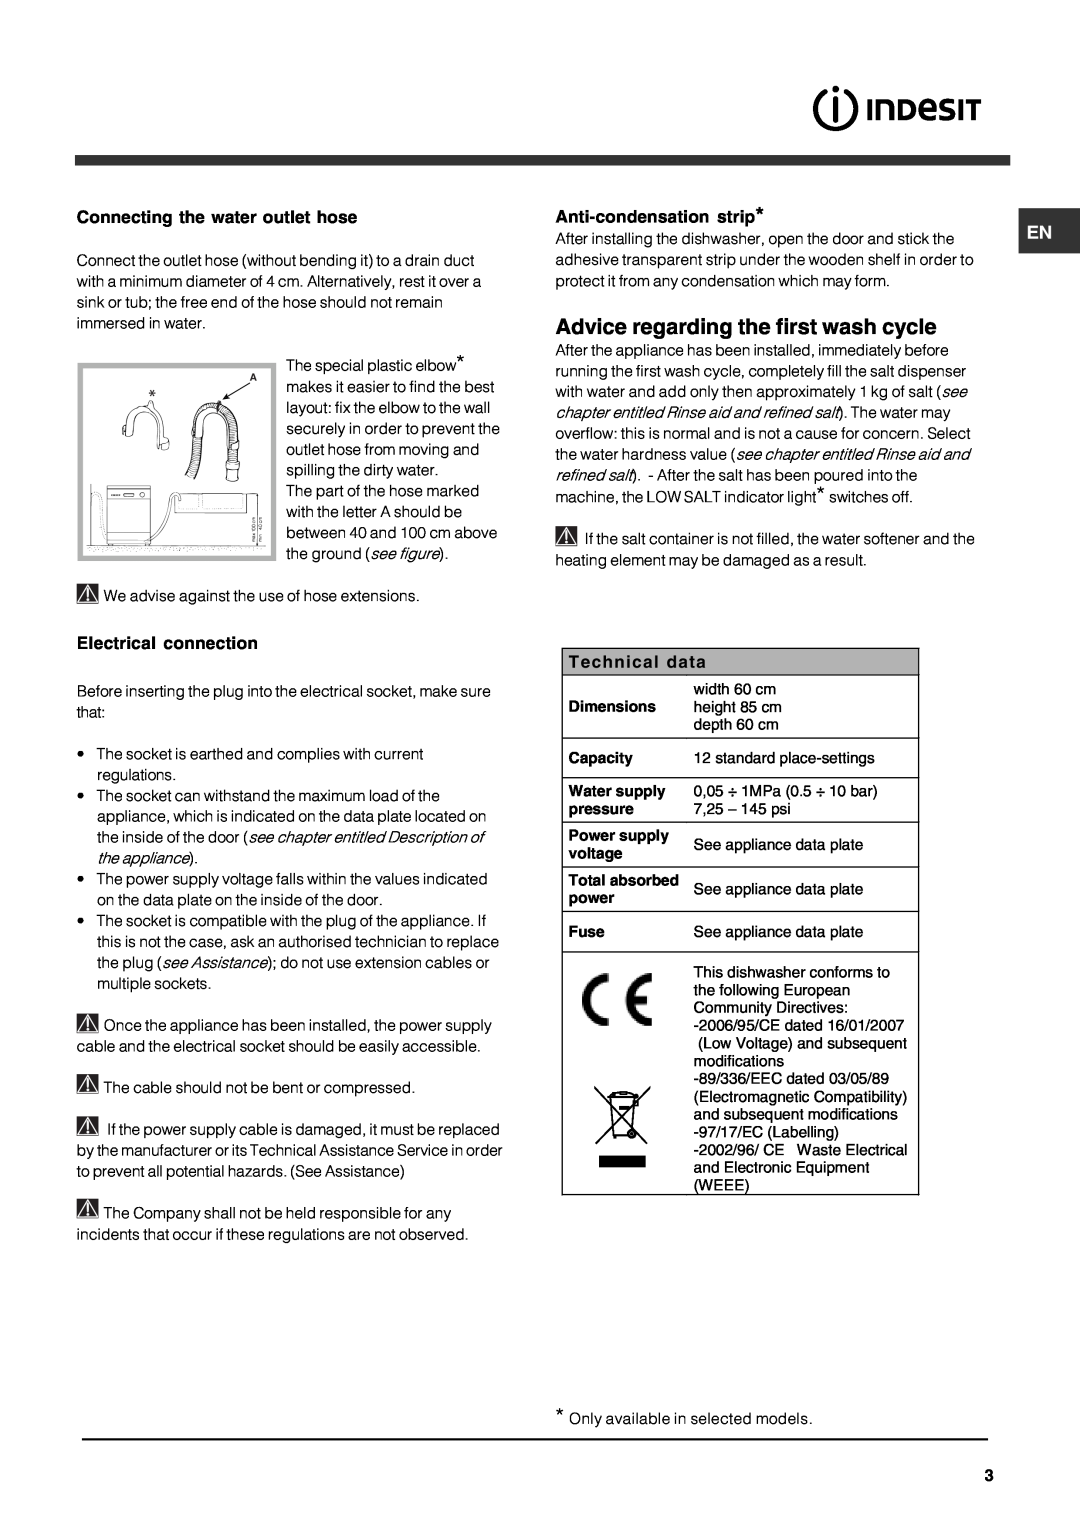 Indesit DFG 262 Advice regarding the first wash cycle, Connecting the water outlet hose, Anti-condensation strip 